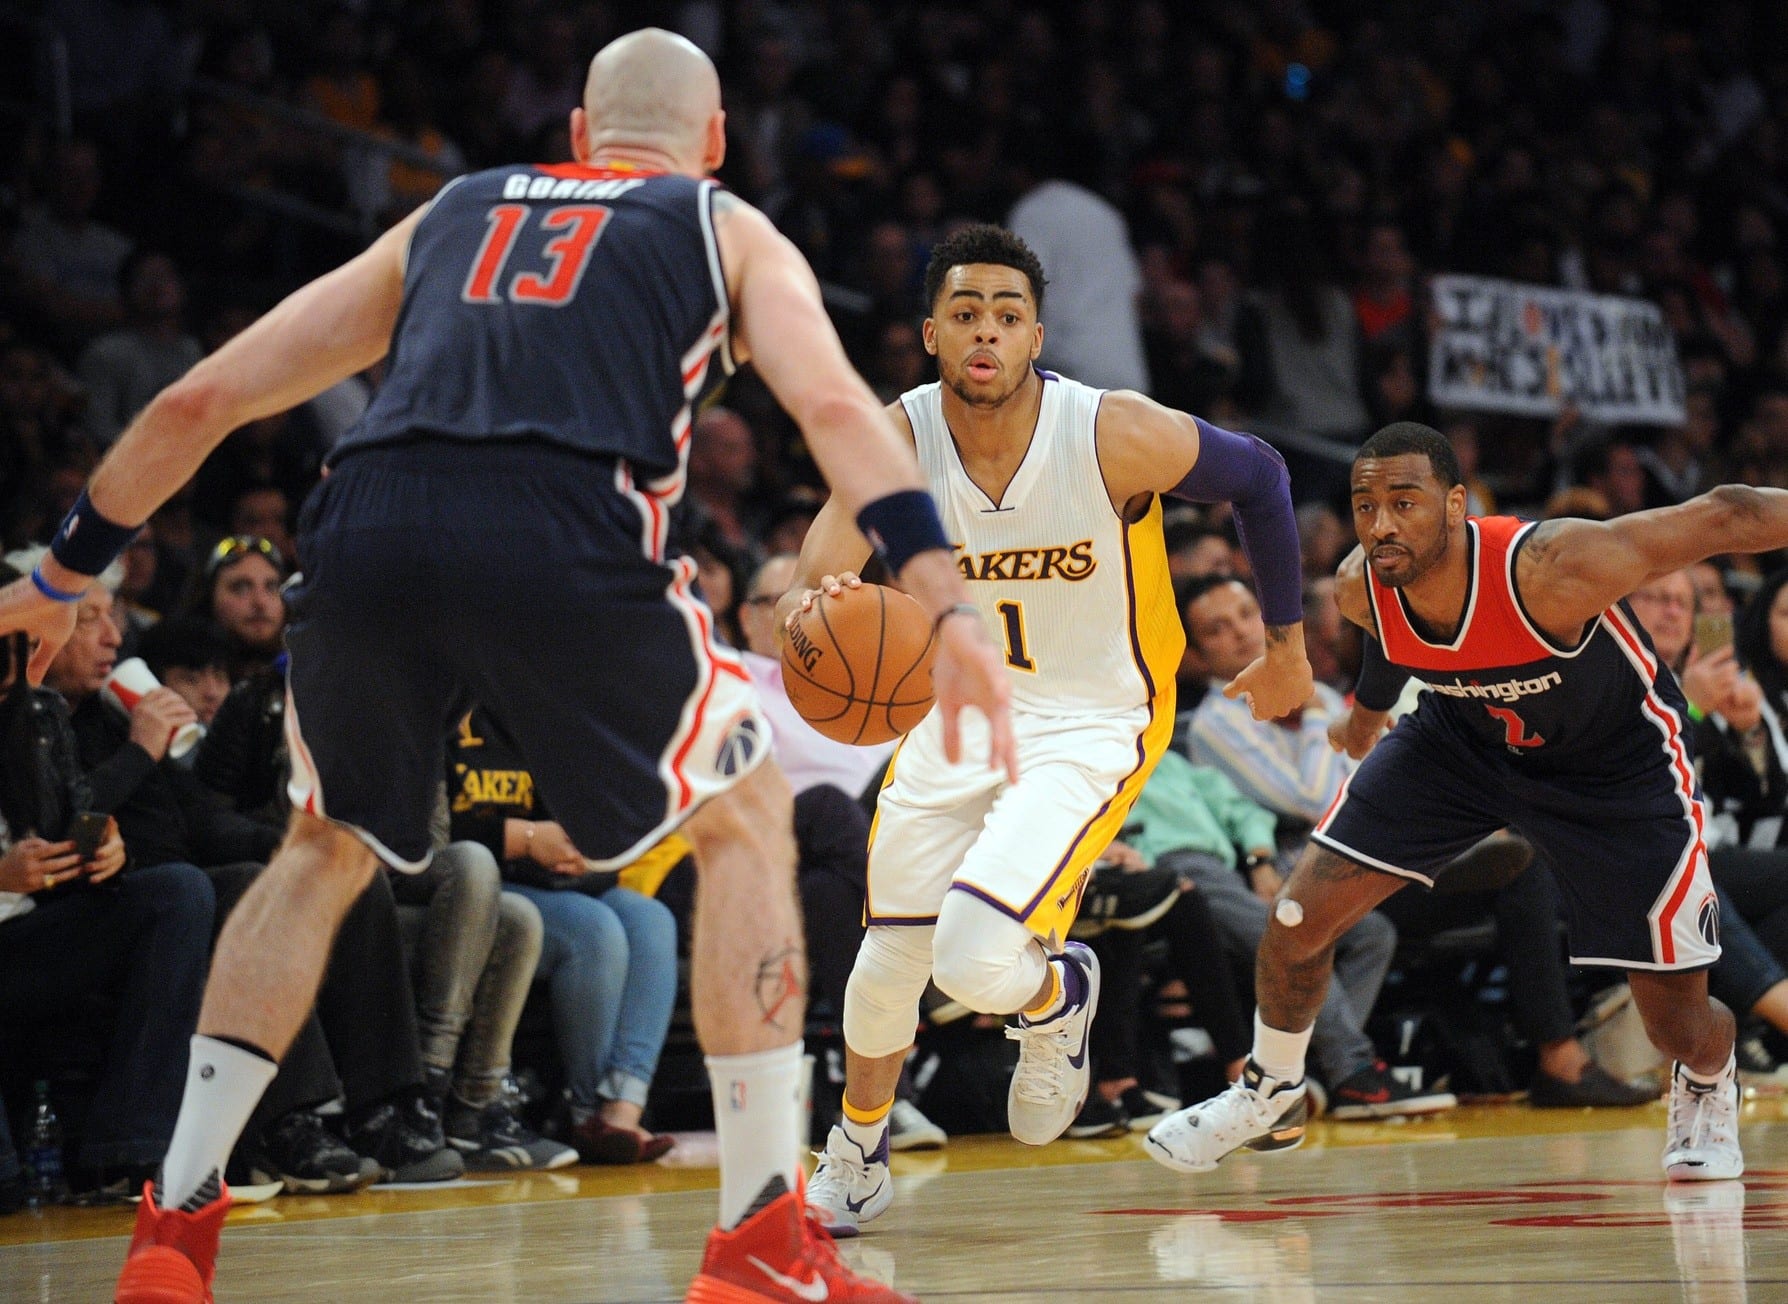 Lakers Vs. Wizards Preview: L.a. Starts Grammy Road Trip In Washington